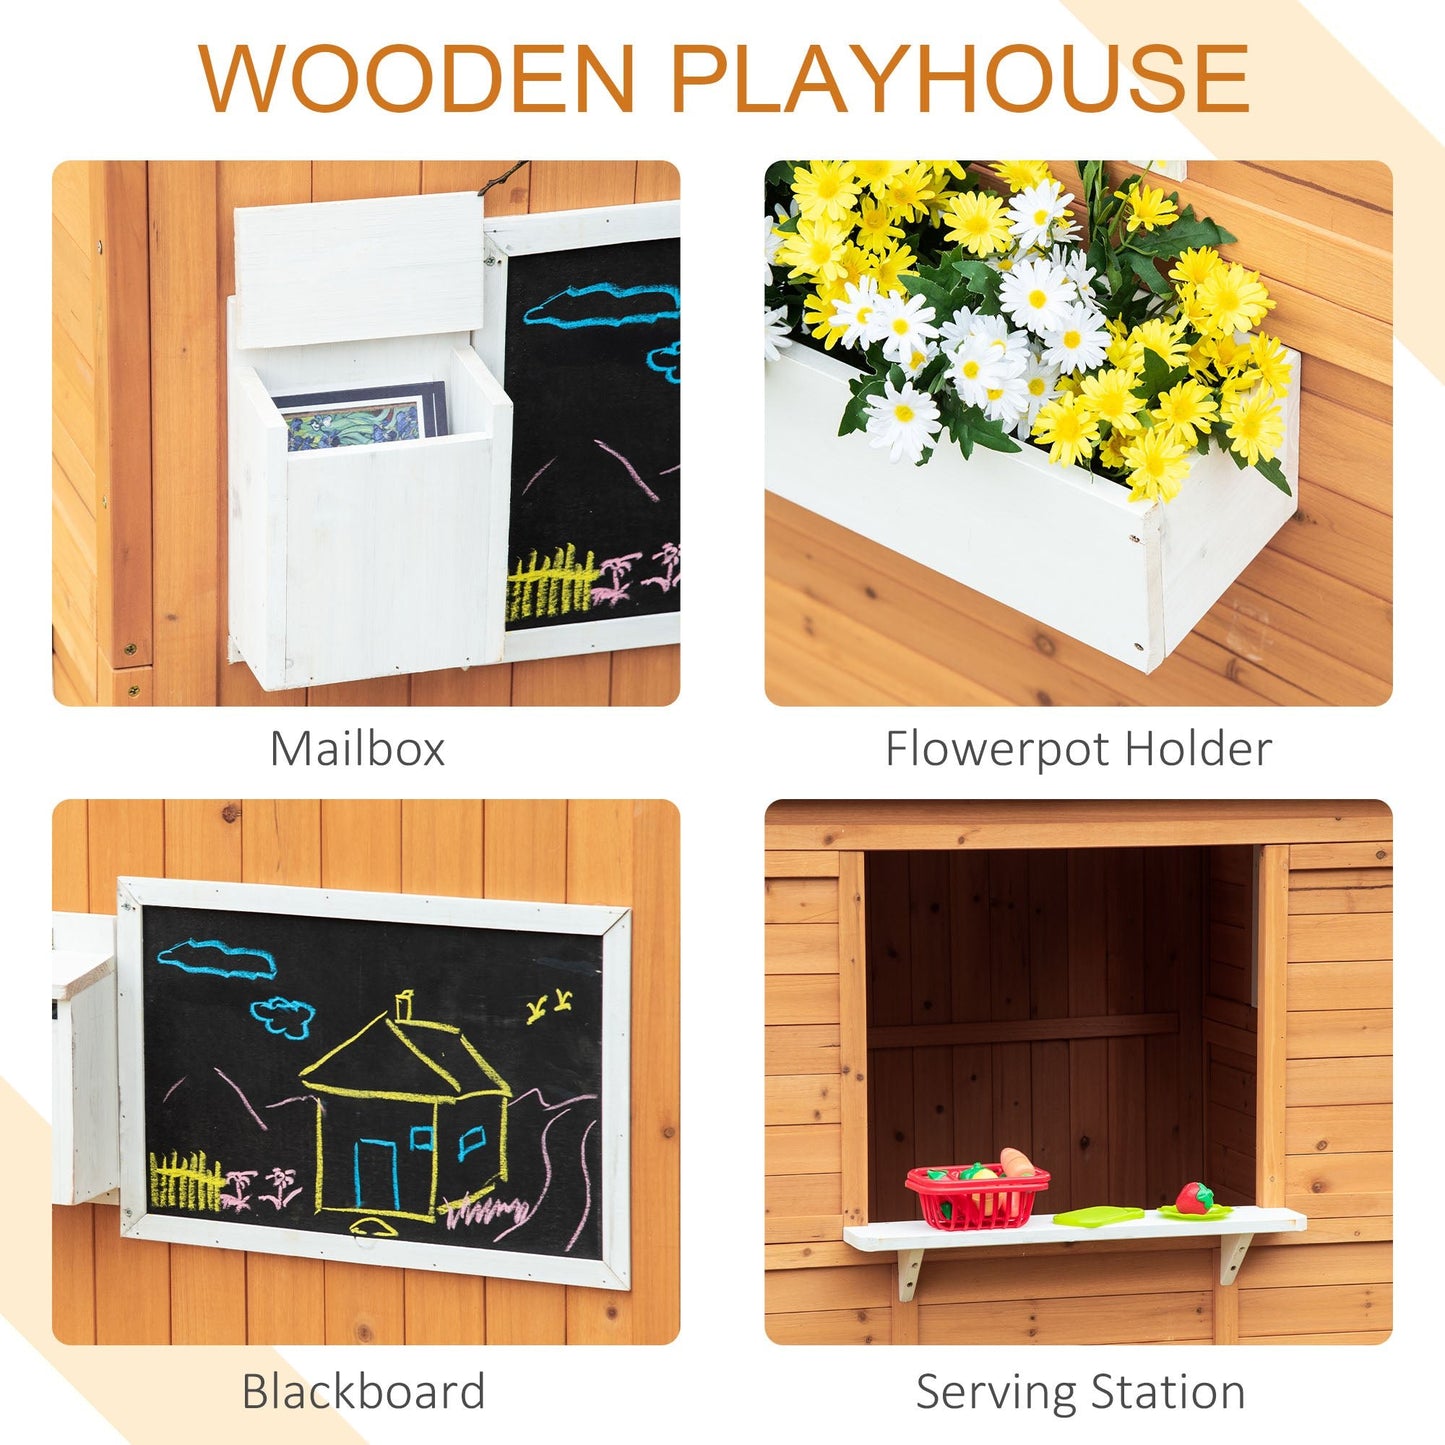 Outdoor and Garden-Outdoor Wooden Playhouse for Kids, Games Cottage, with Working Door, Windows, Mailbox, Bench, Flowers Pot Holder, 48" x 42.5" x 53" - Outdoor Style Company